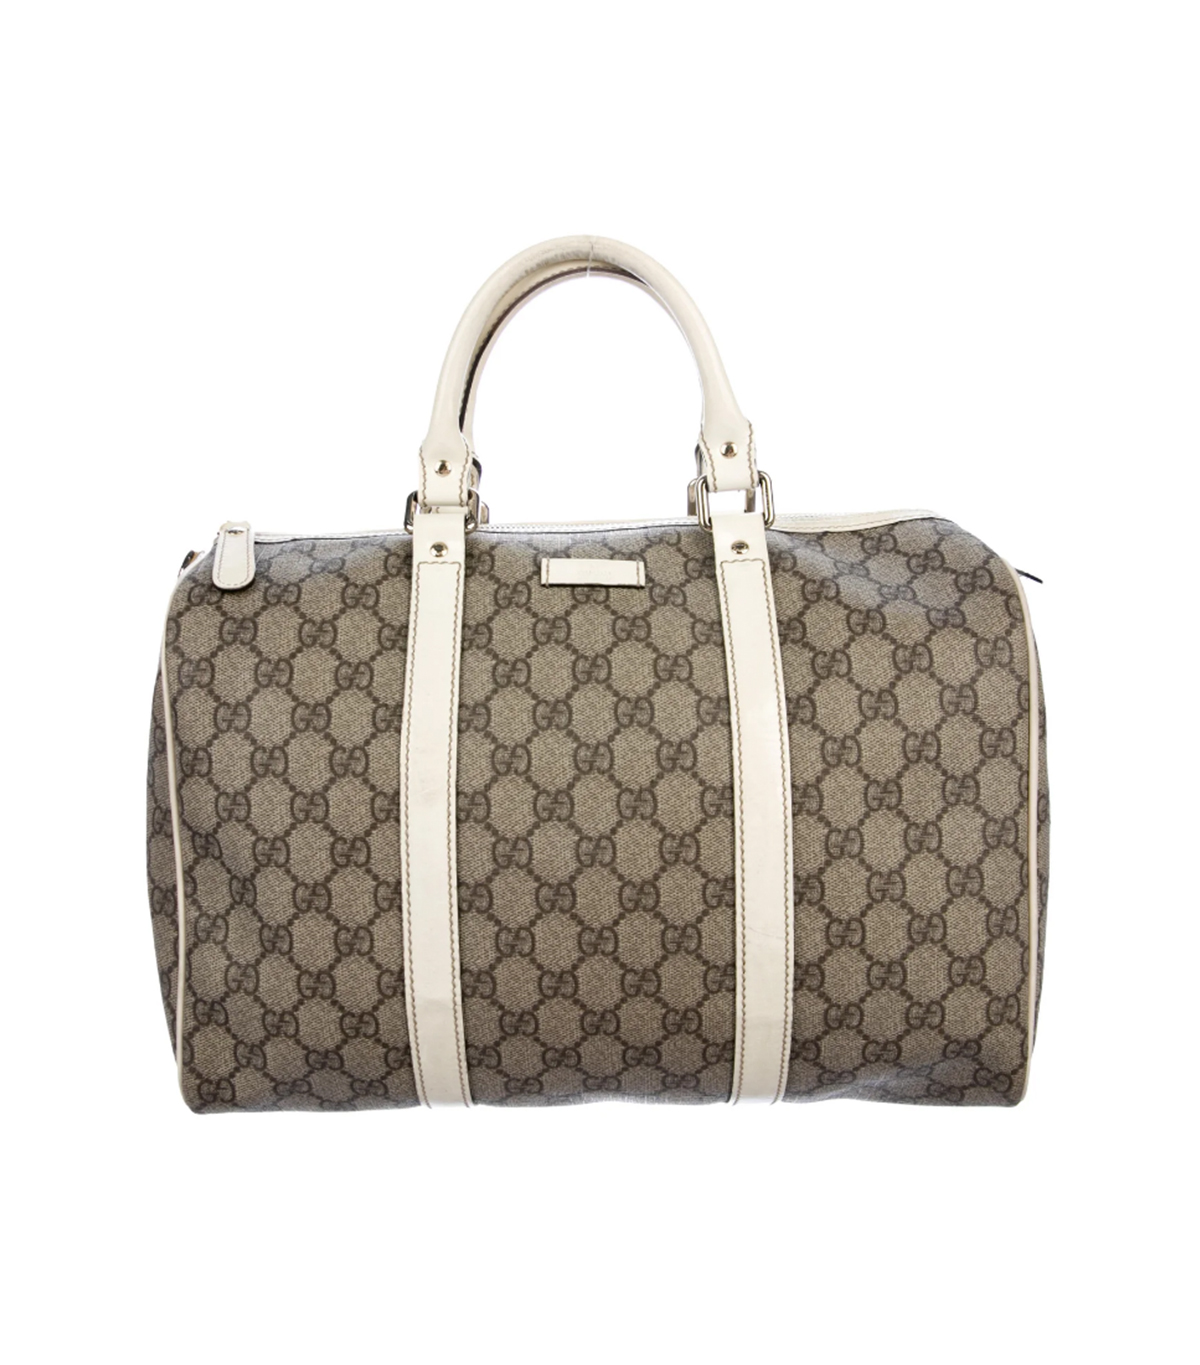 22 Classic Gucci Handbags Under $1000 | Who What Wear